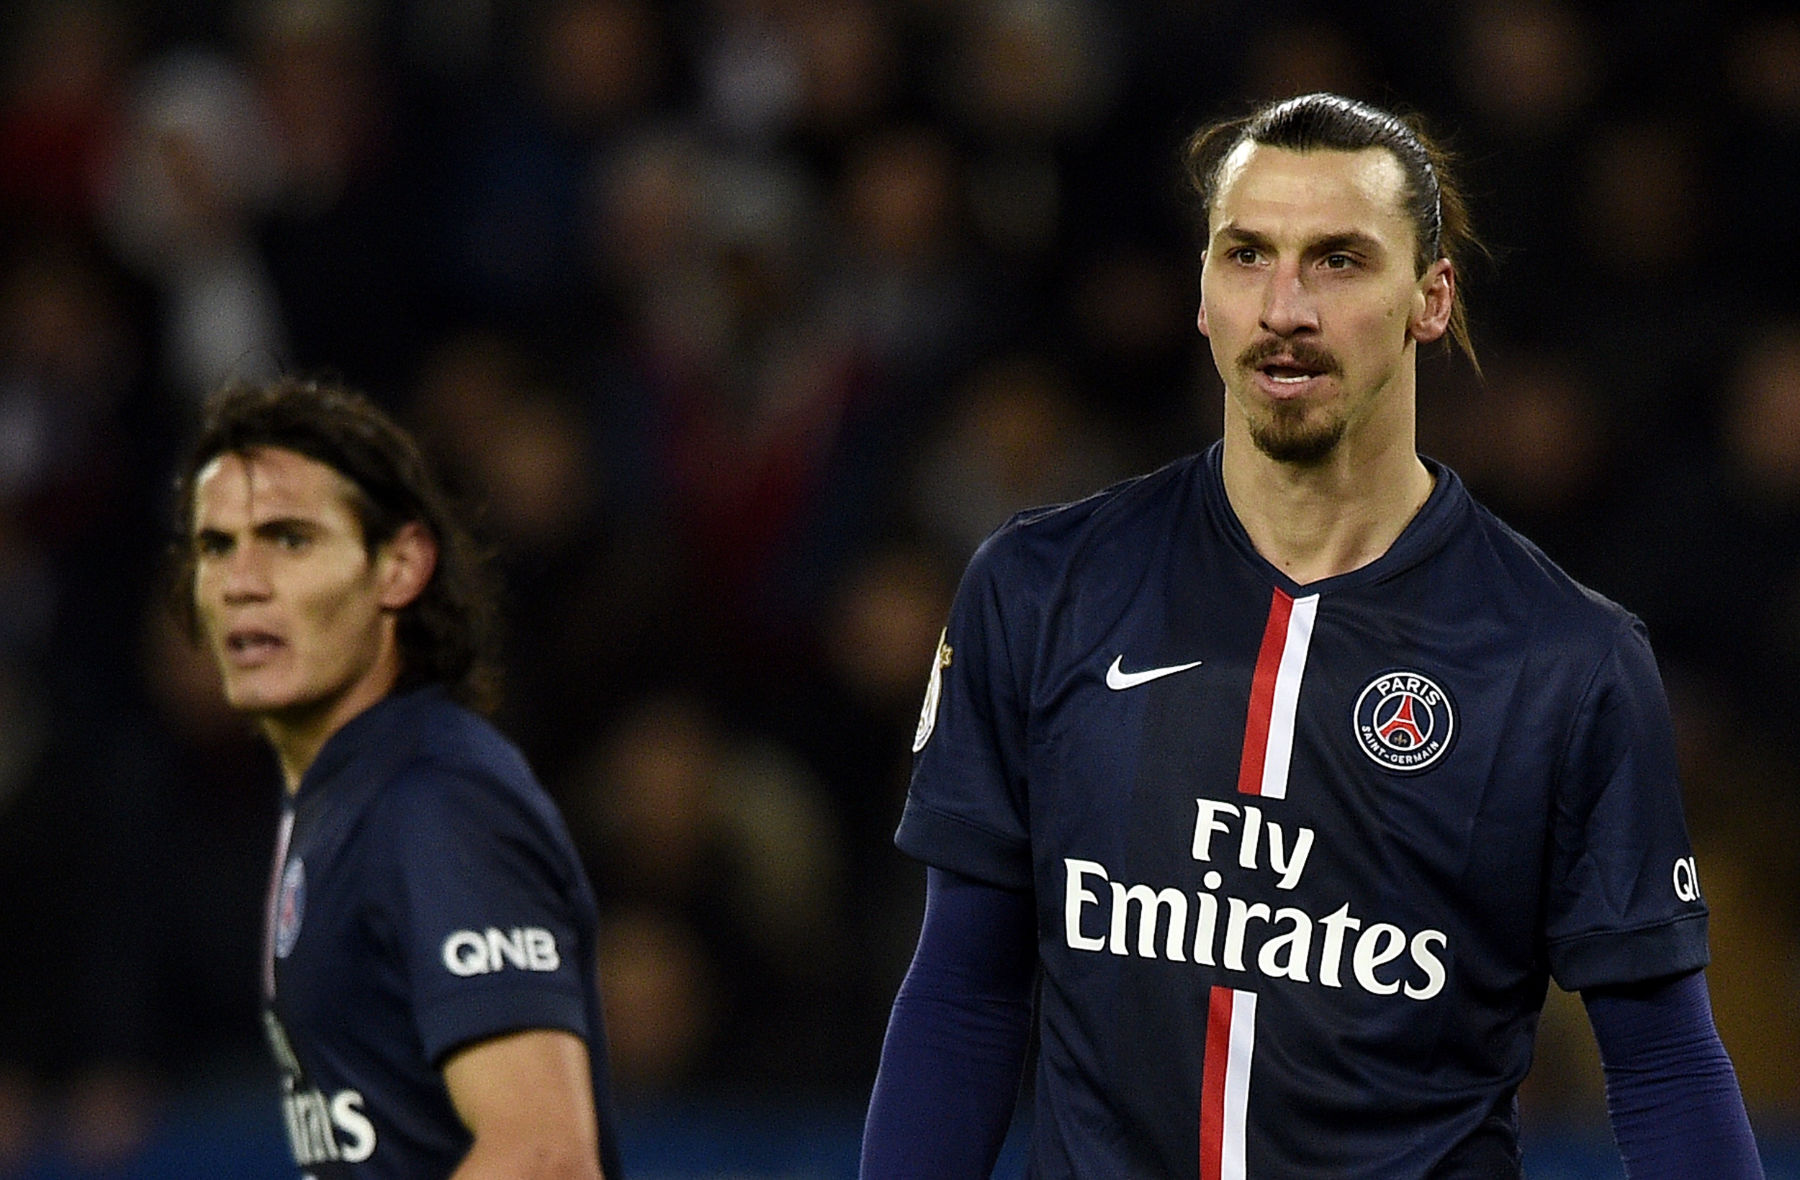 The One Player at PSG That Zlatan Ibrahimovic Hated - PSG Talk